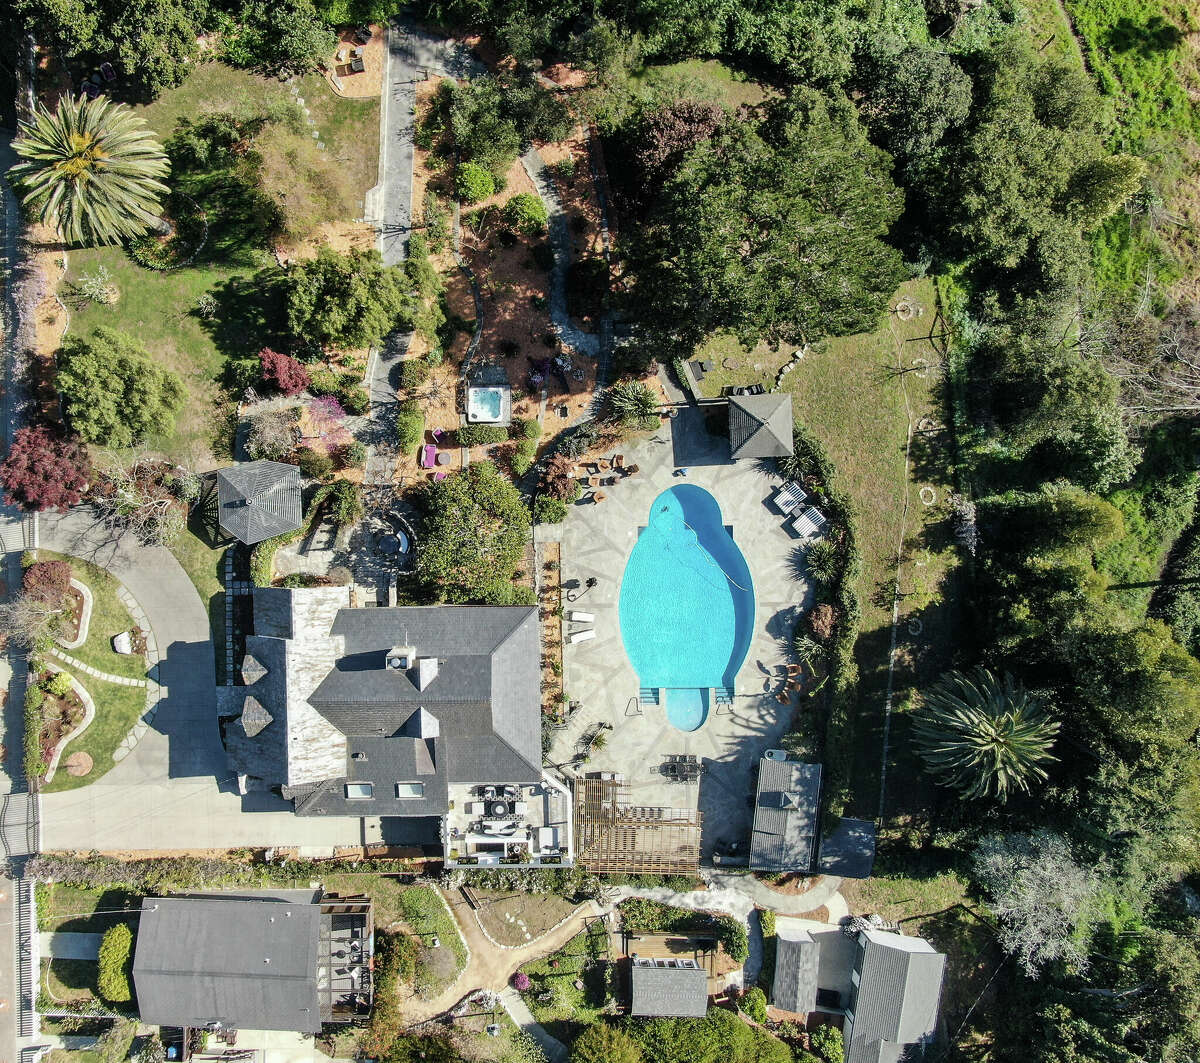 This Santa Cruz property has been in one family for almost 100 years. An ocean view estate, it could be yours for $7.9 million.